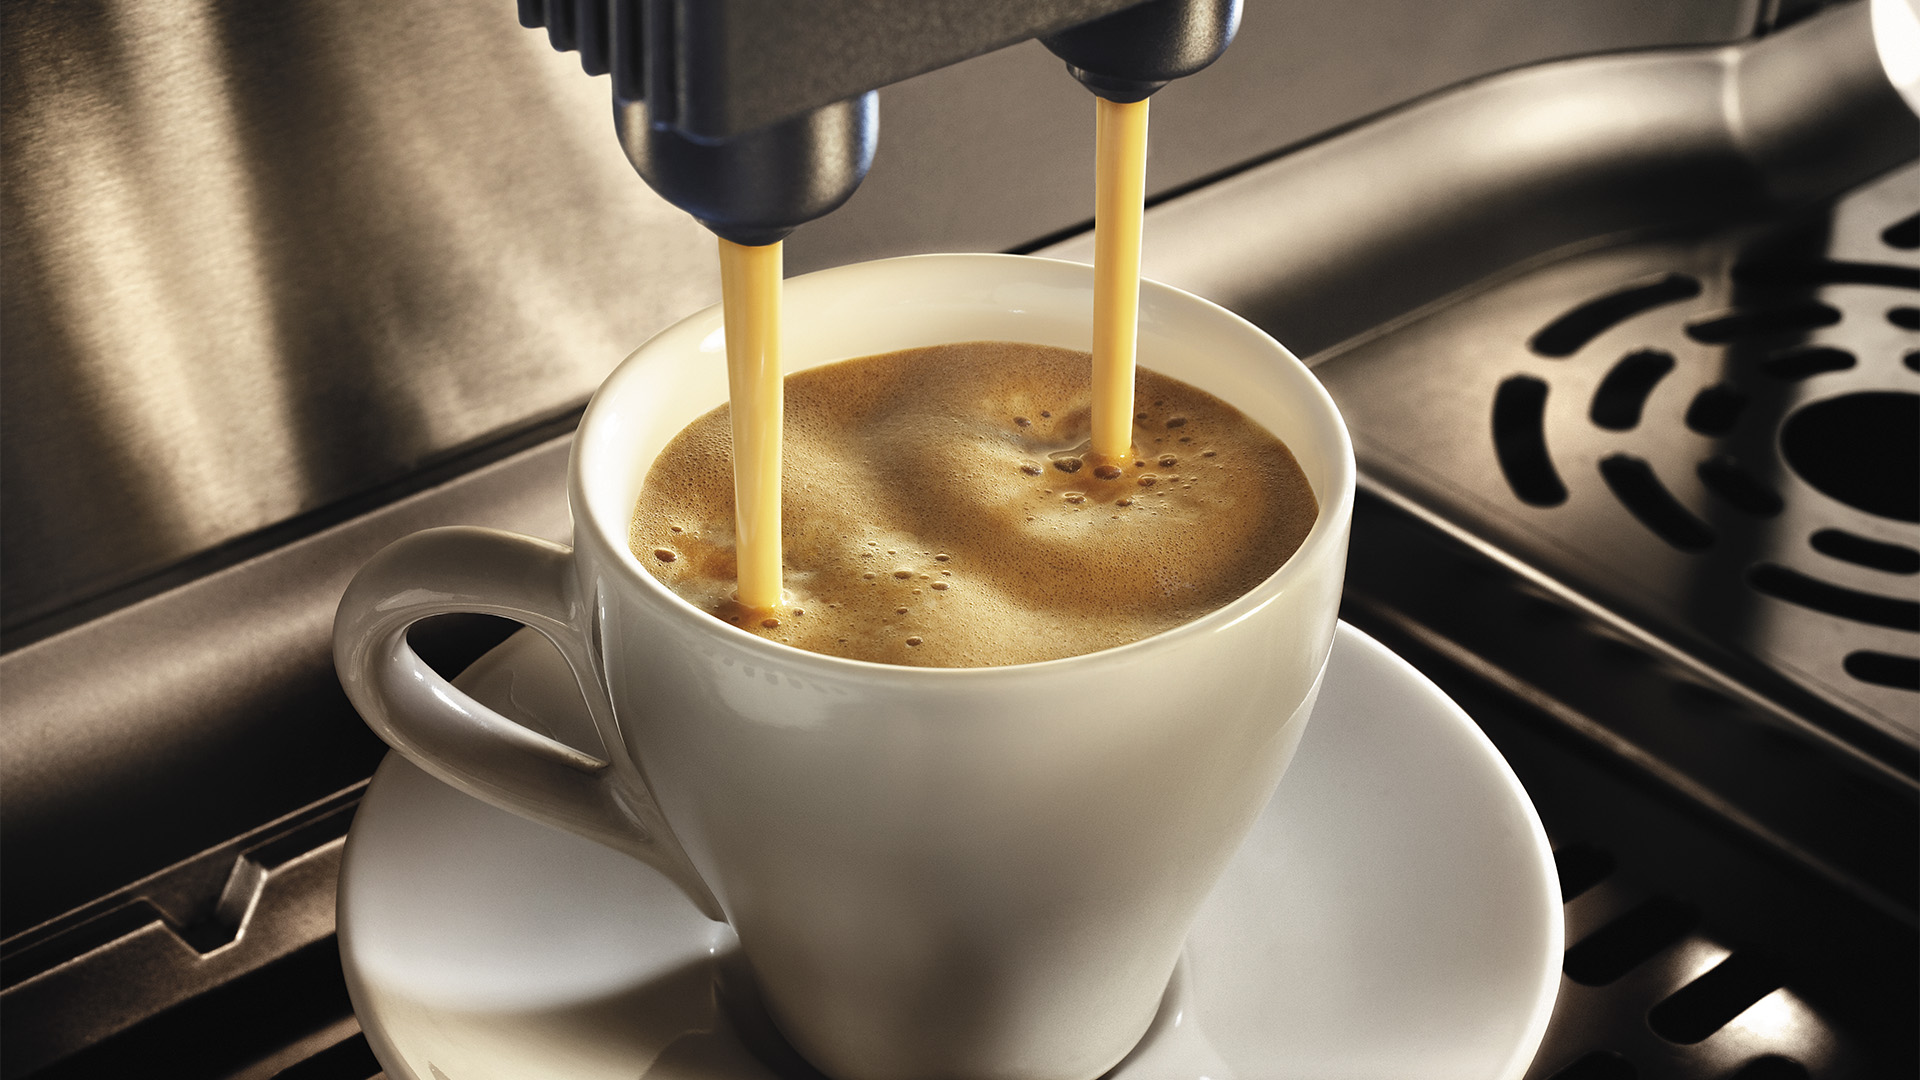 Europe and the espresso machine market - Coffee Business Intelligence